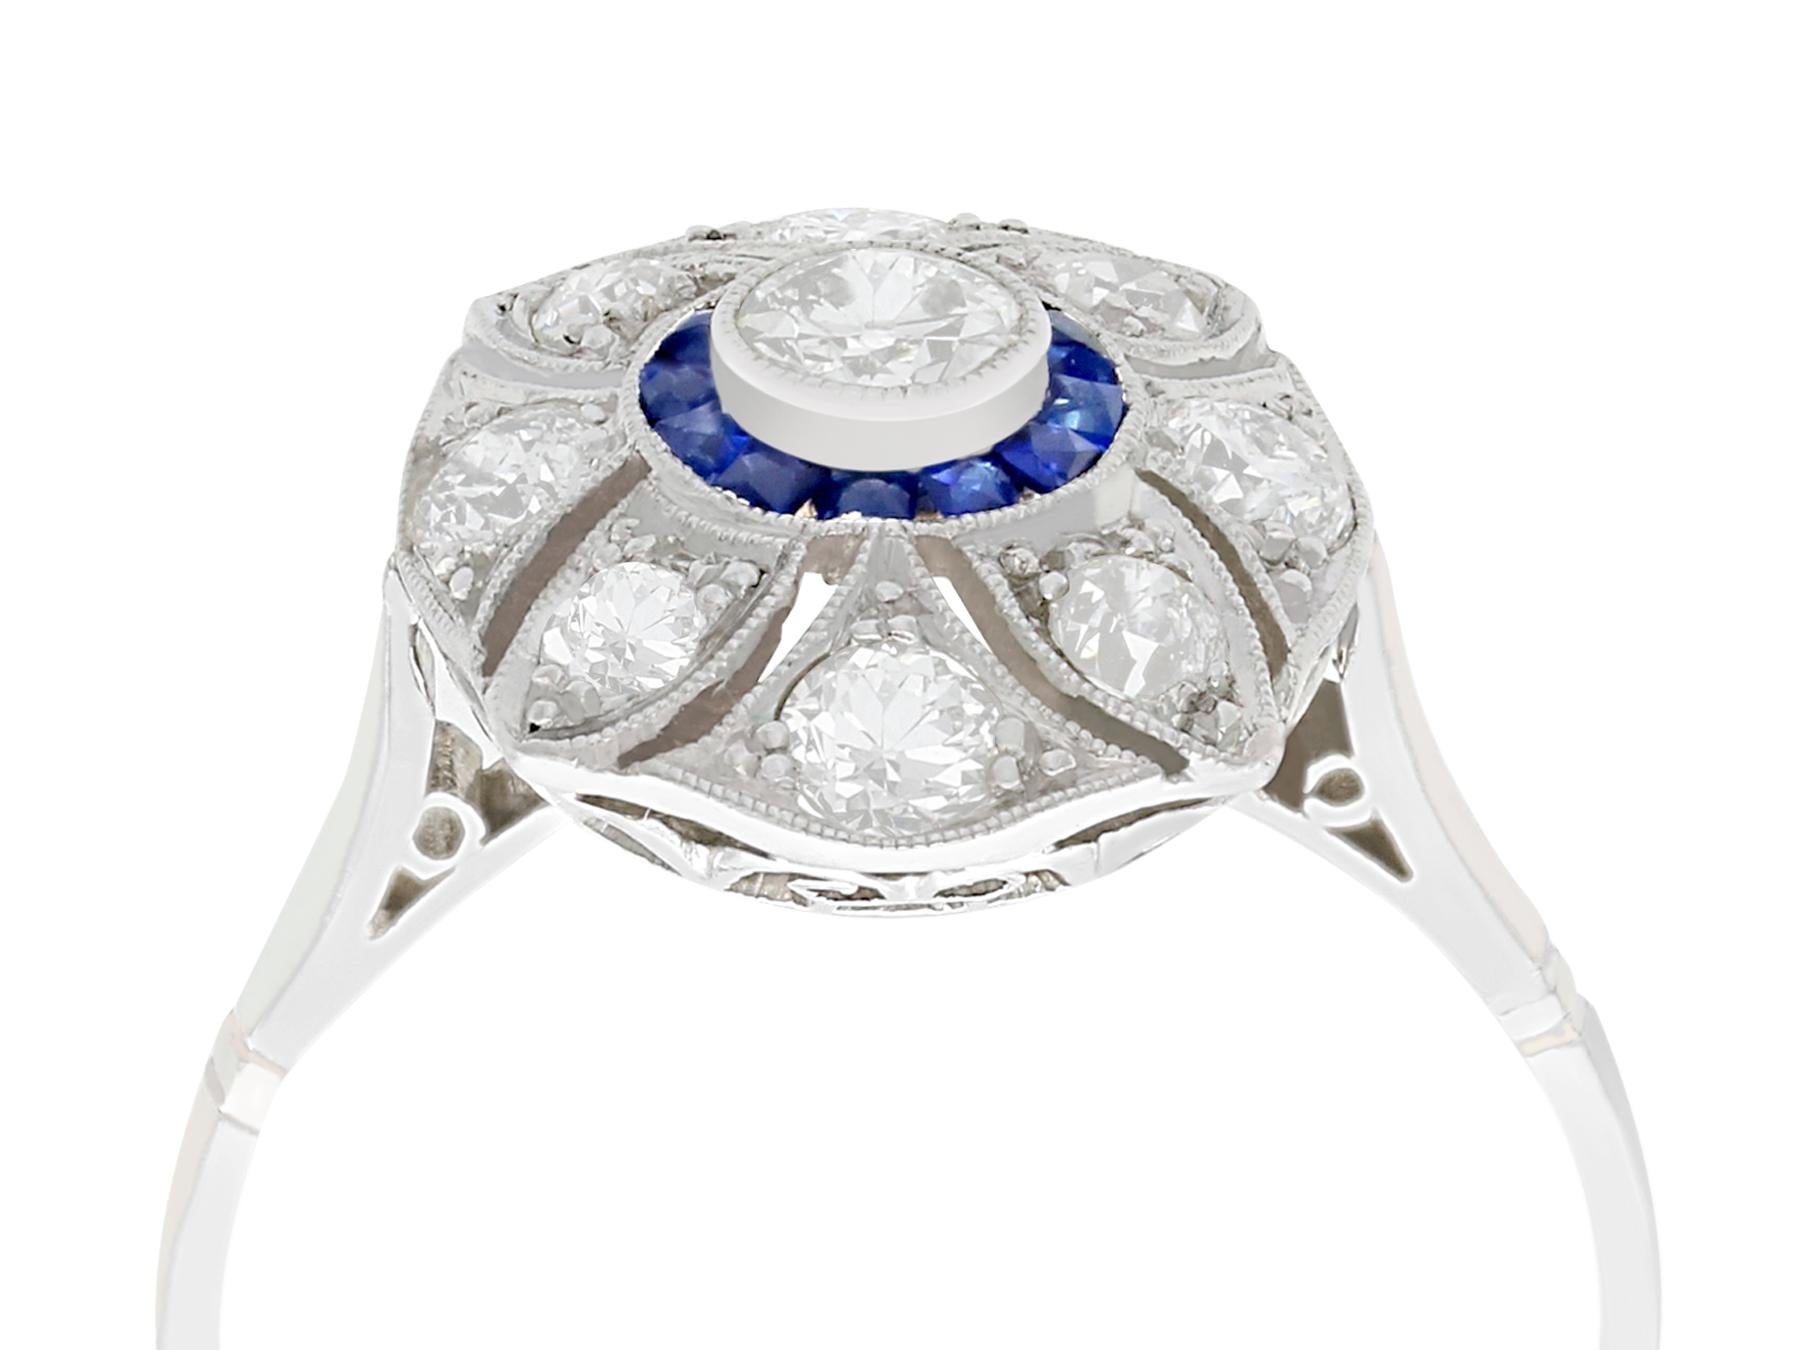 A stunning vintage 0.76 carat diamond and 0.18 carat blue sapphire, platinum cocktail ring; part of our diverse gemstone jewelry and estate jewelry collections.

This stunning, fine and impressive sapphire and diamond dress ring has been crafted in